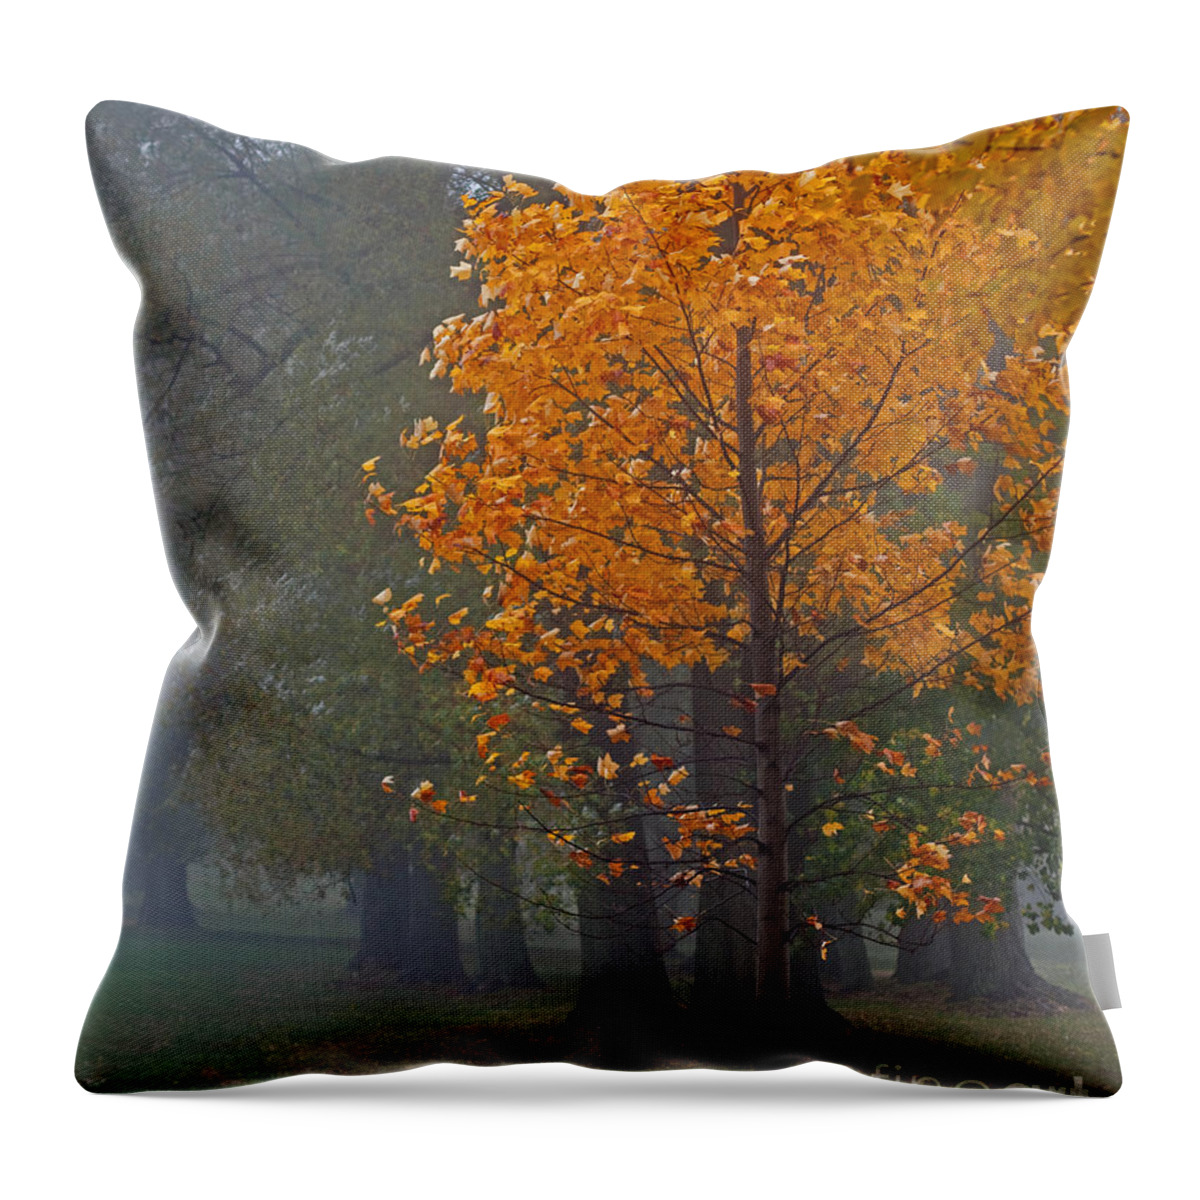 Fog Throw Pillow featuring the photograph Glowing In The Fog by Barbara McMahon